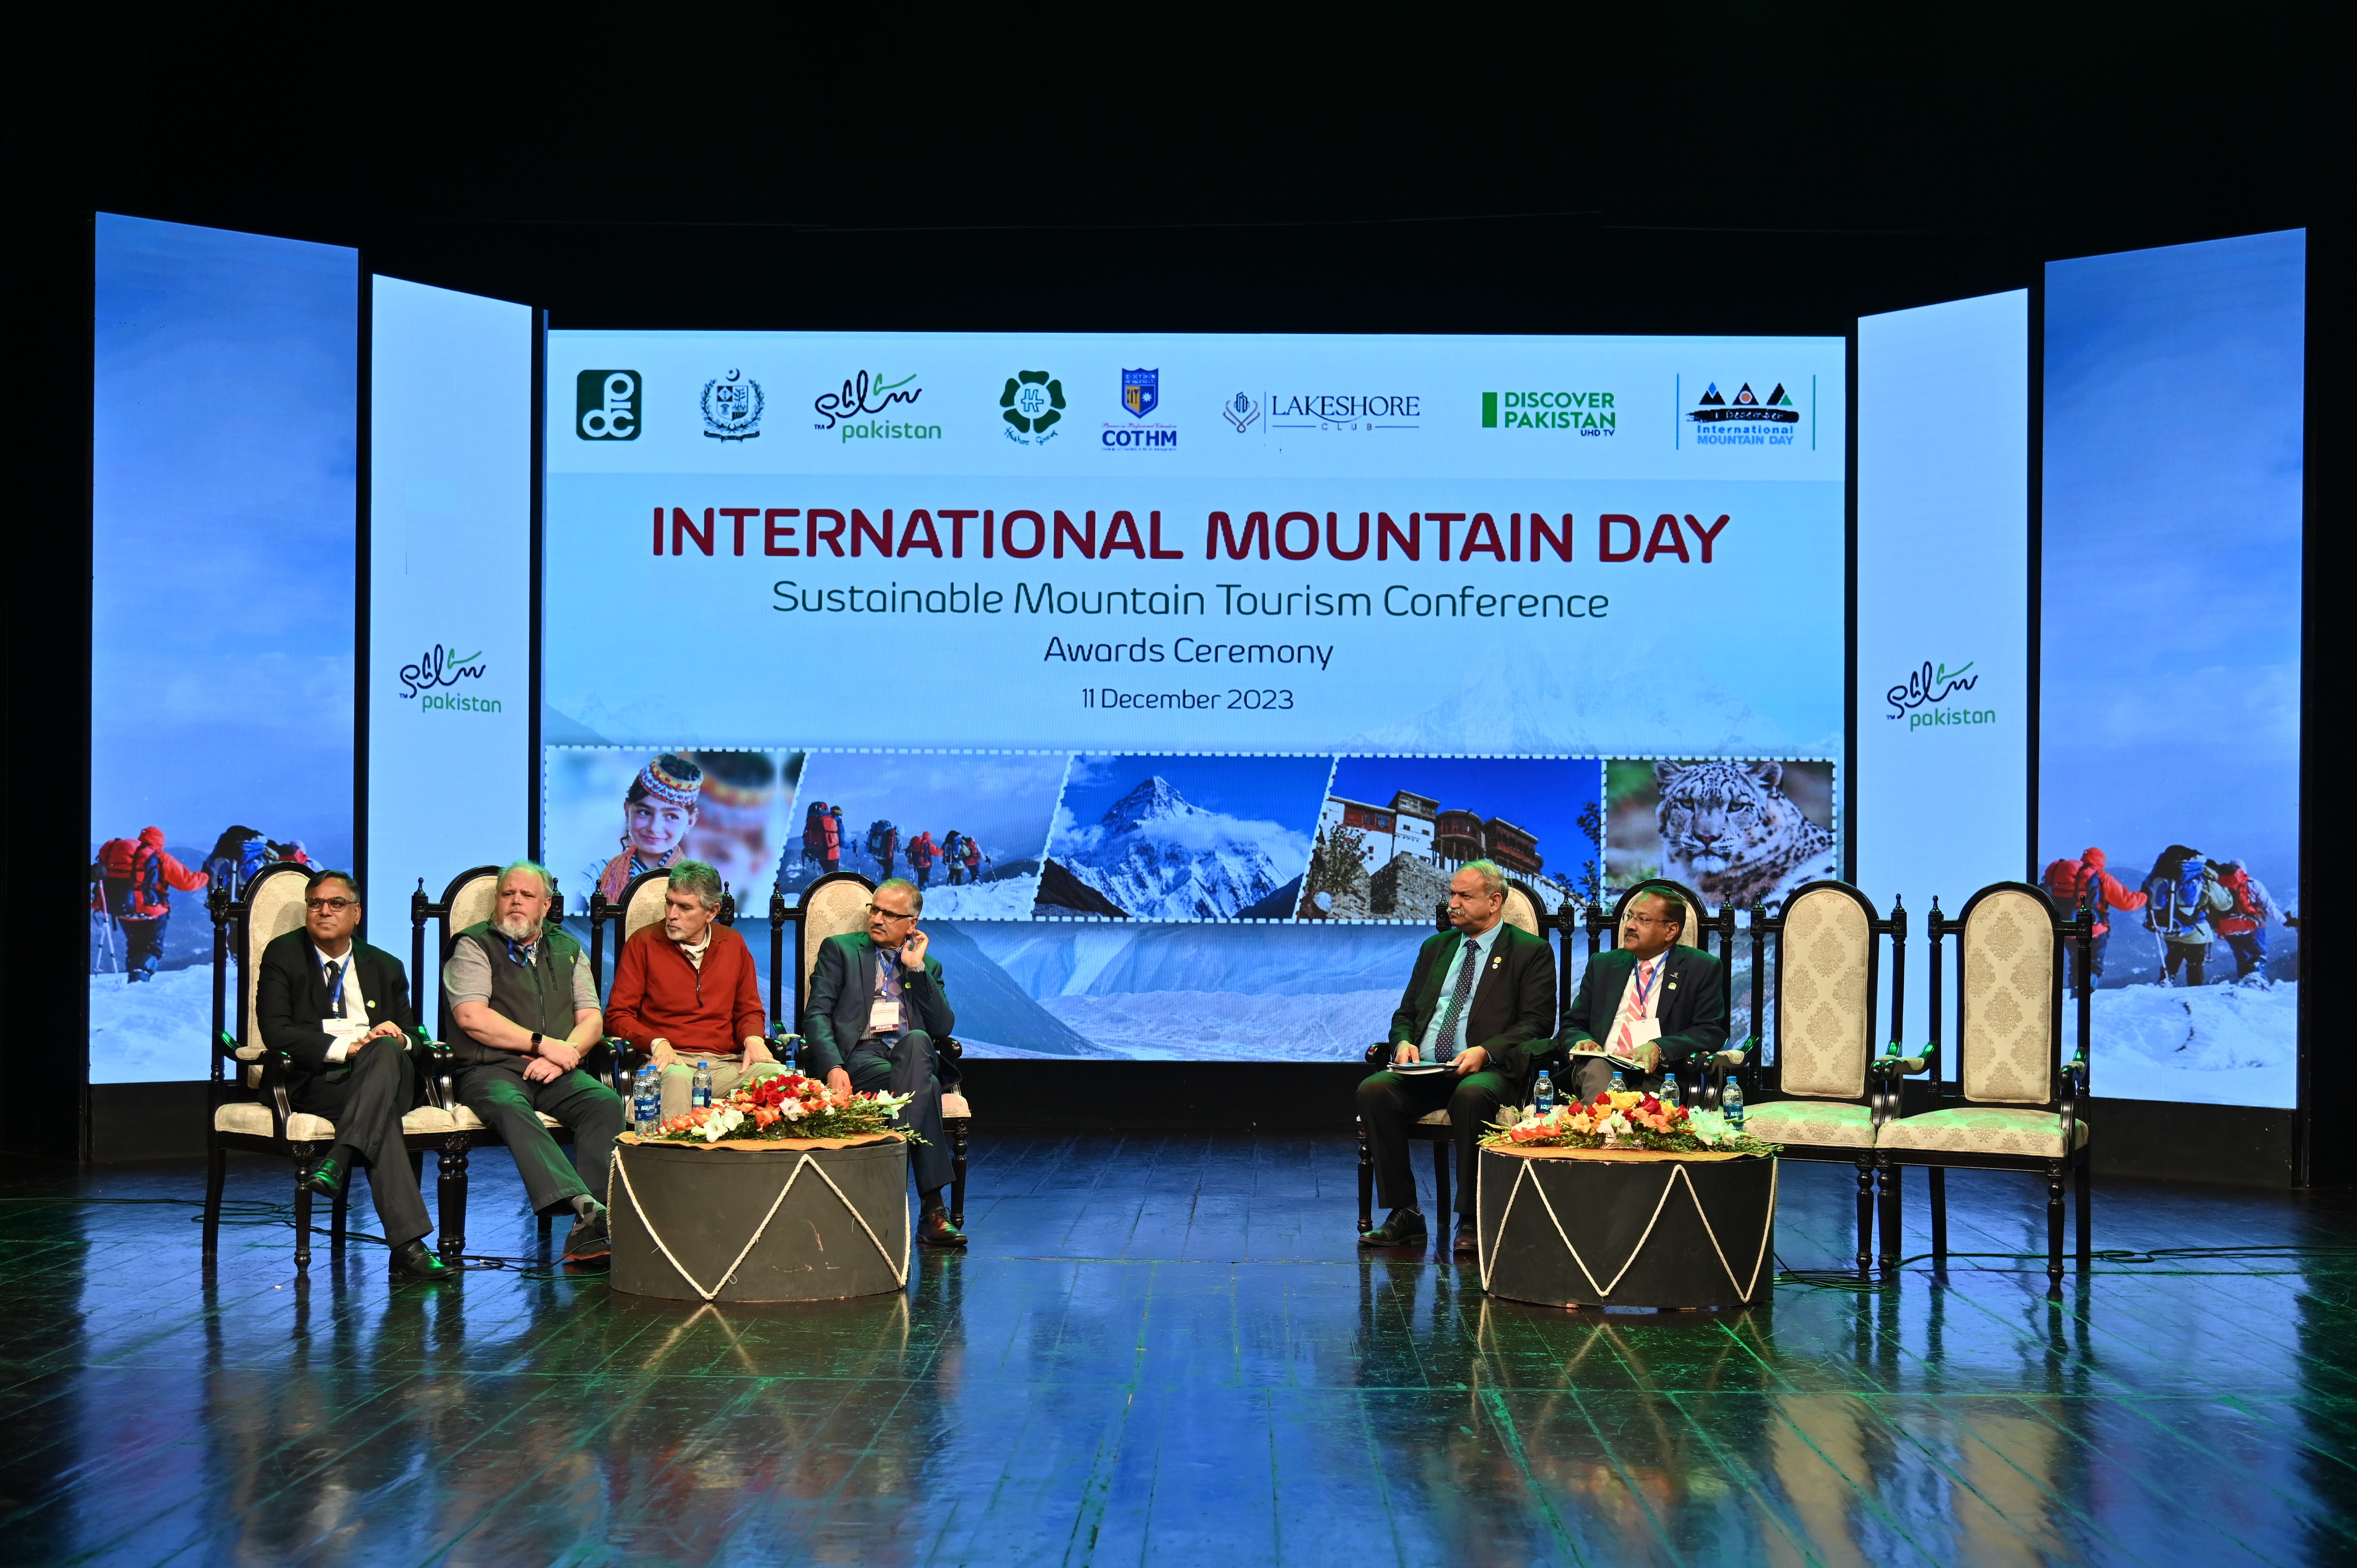 The speakers at the award distribution ceremony on  International Mountain Day at PNCA